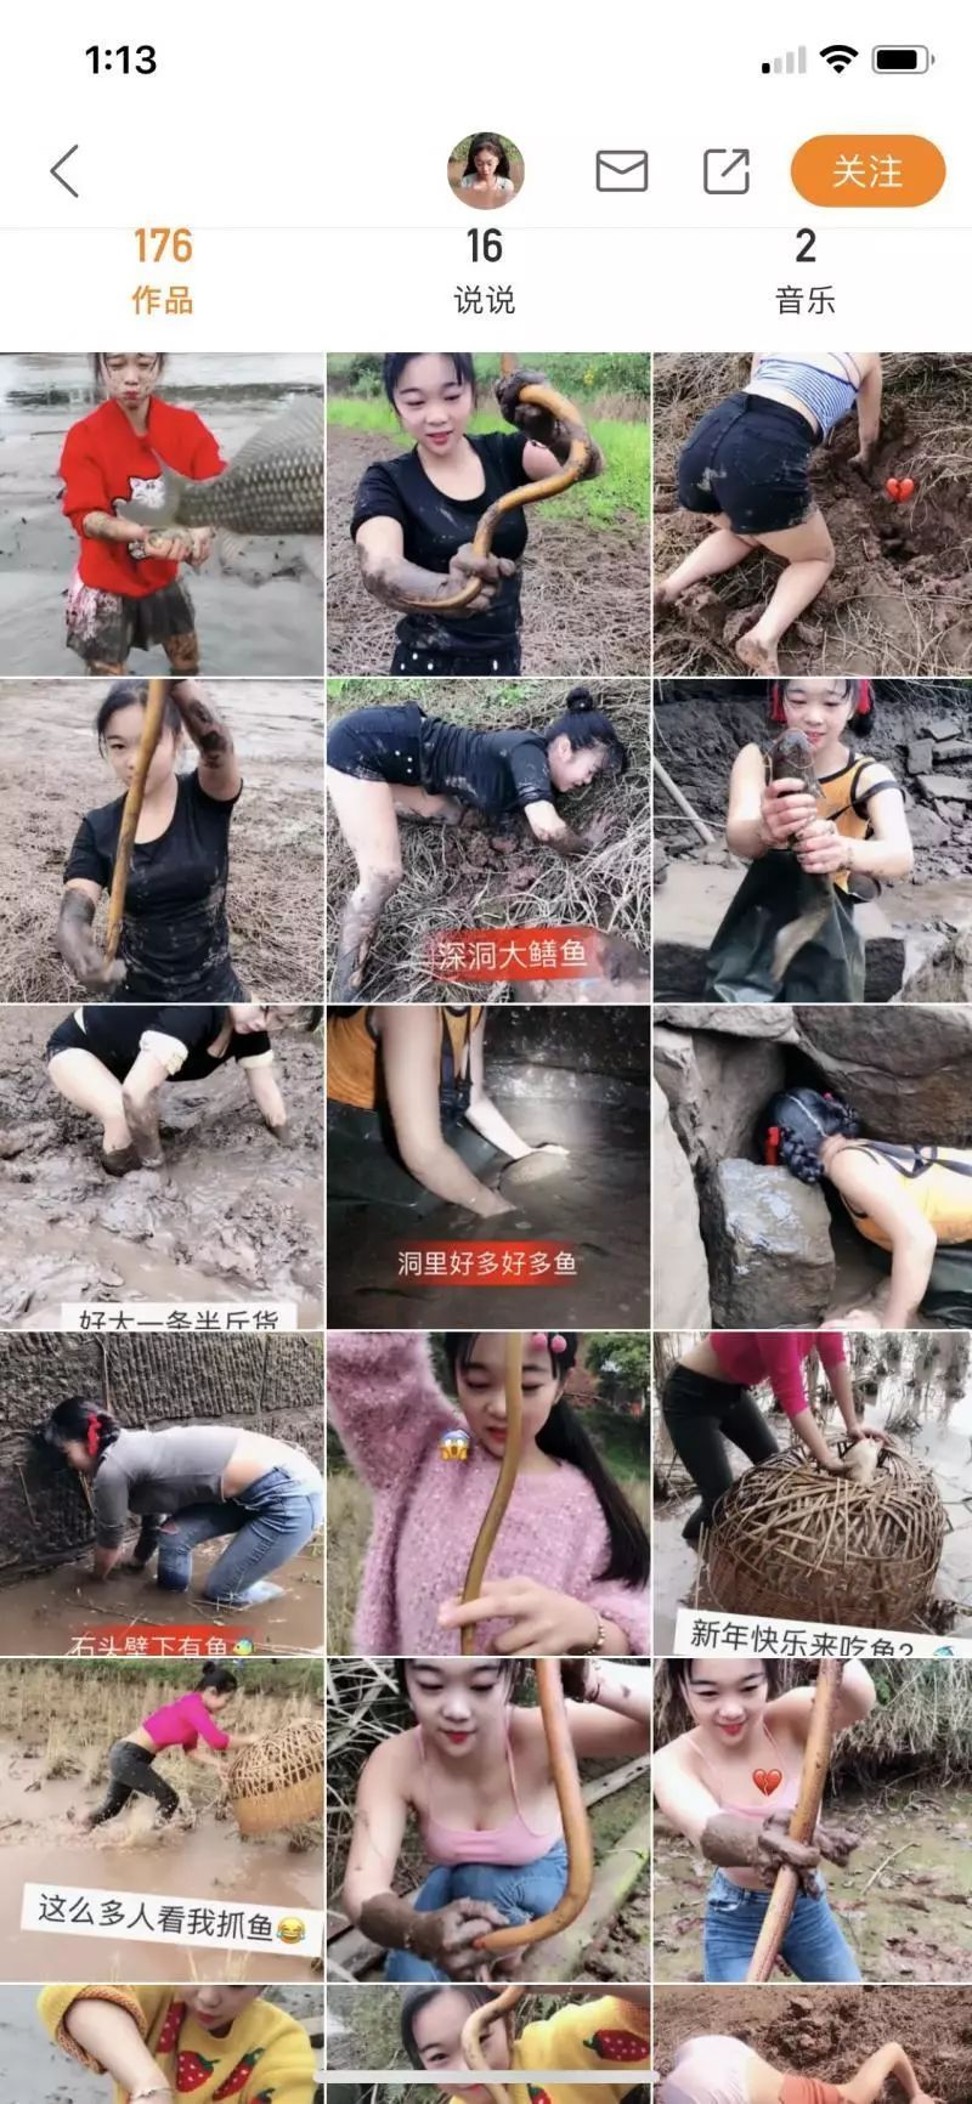 The woman was filmed in a variety of outfits while catching fish and eels. Photo: Weibo